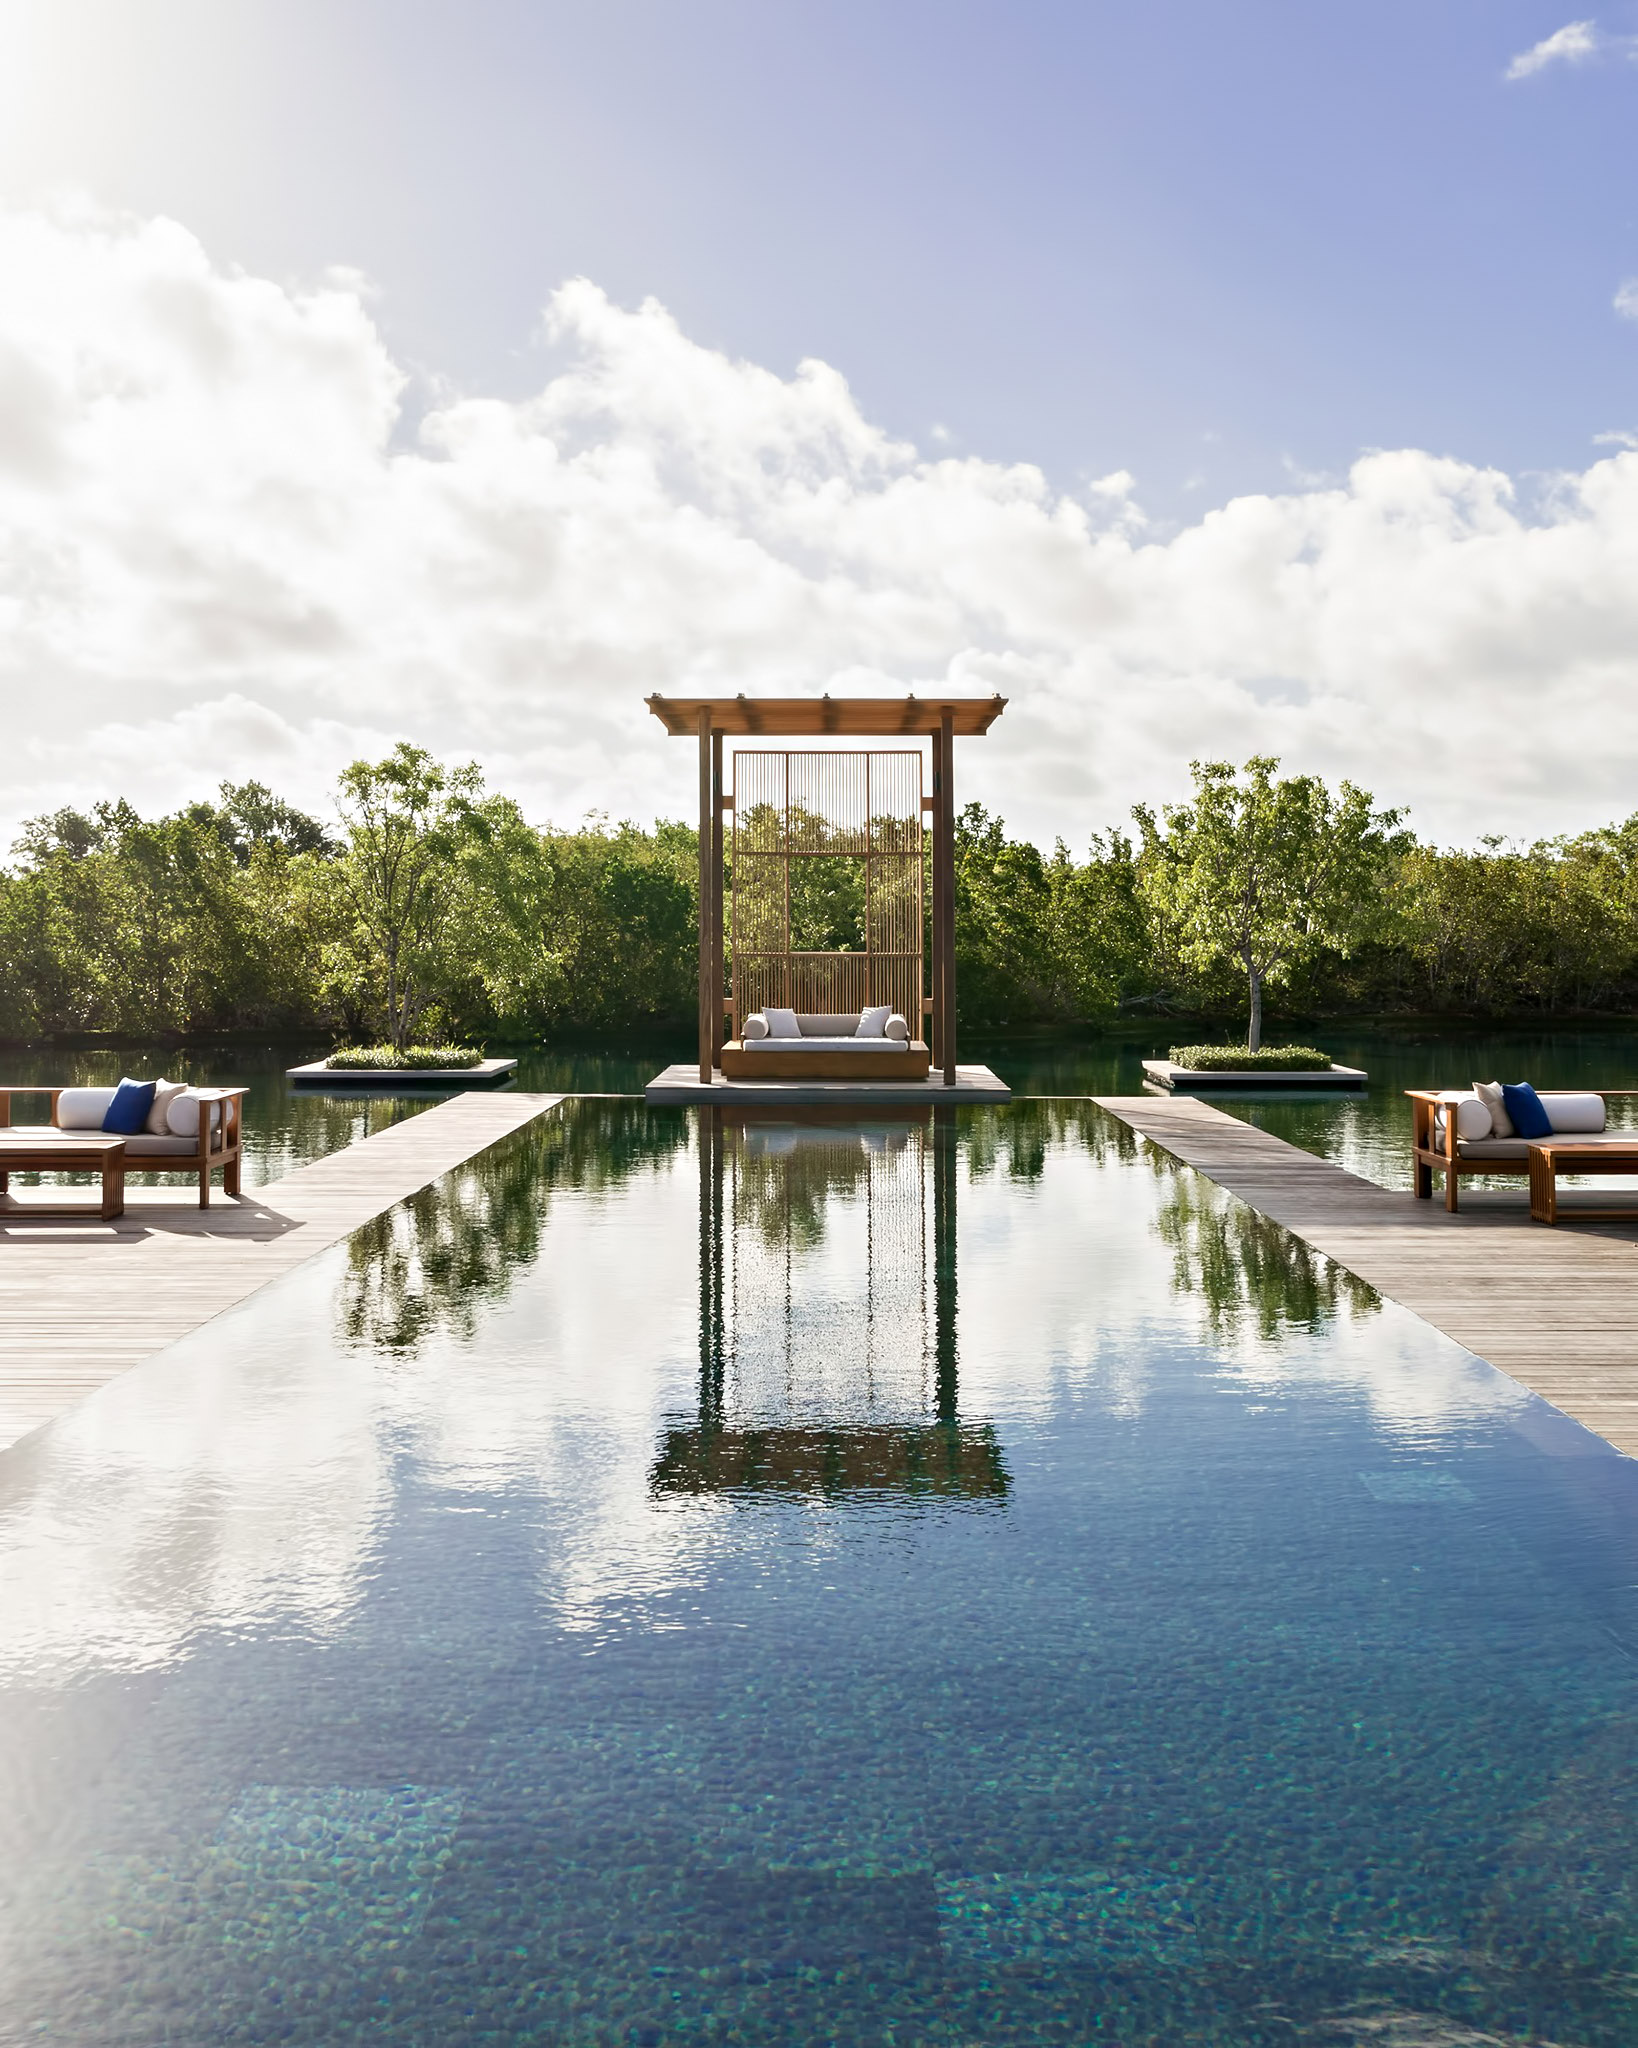 Amanyara Resort – Providenciales, Turks and Caicos Islands – A Peaceful Place